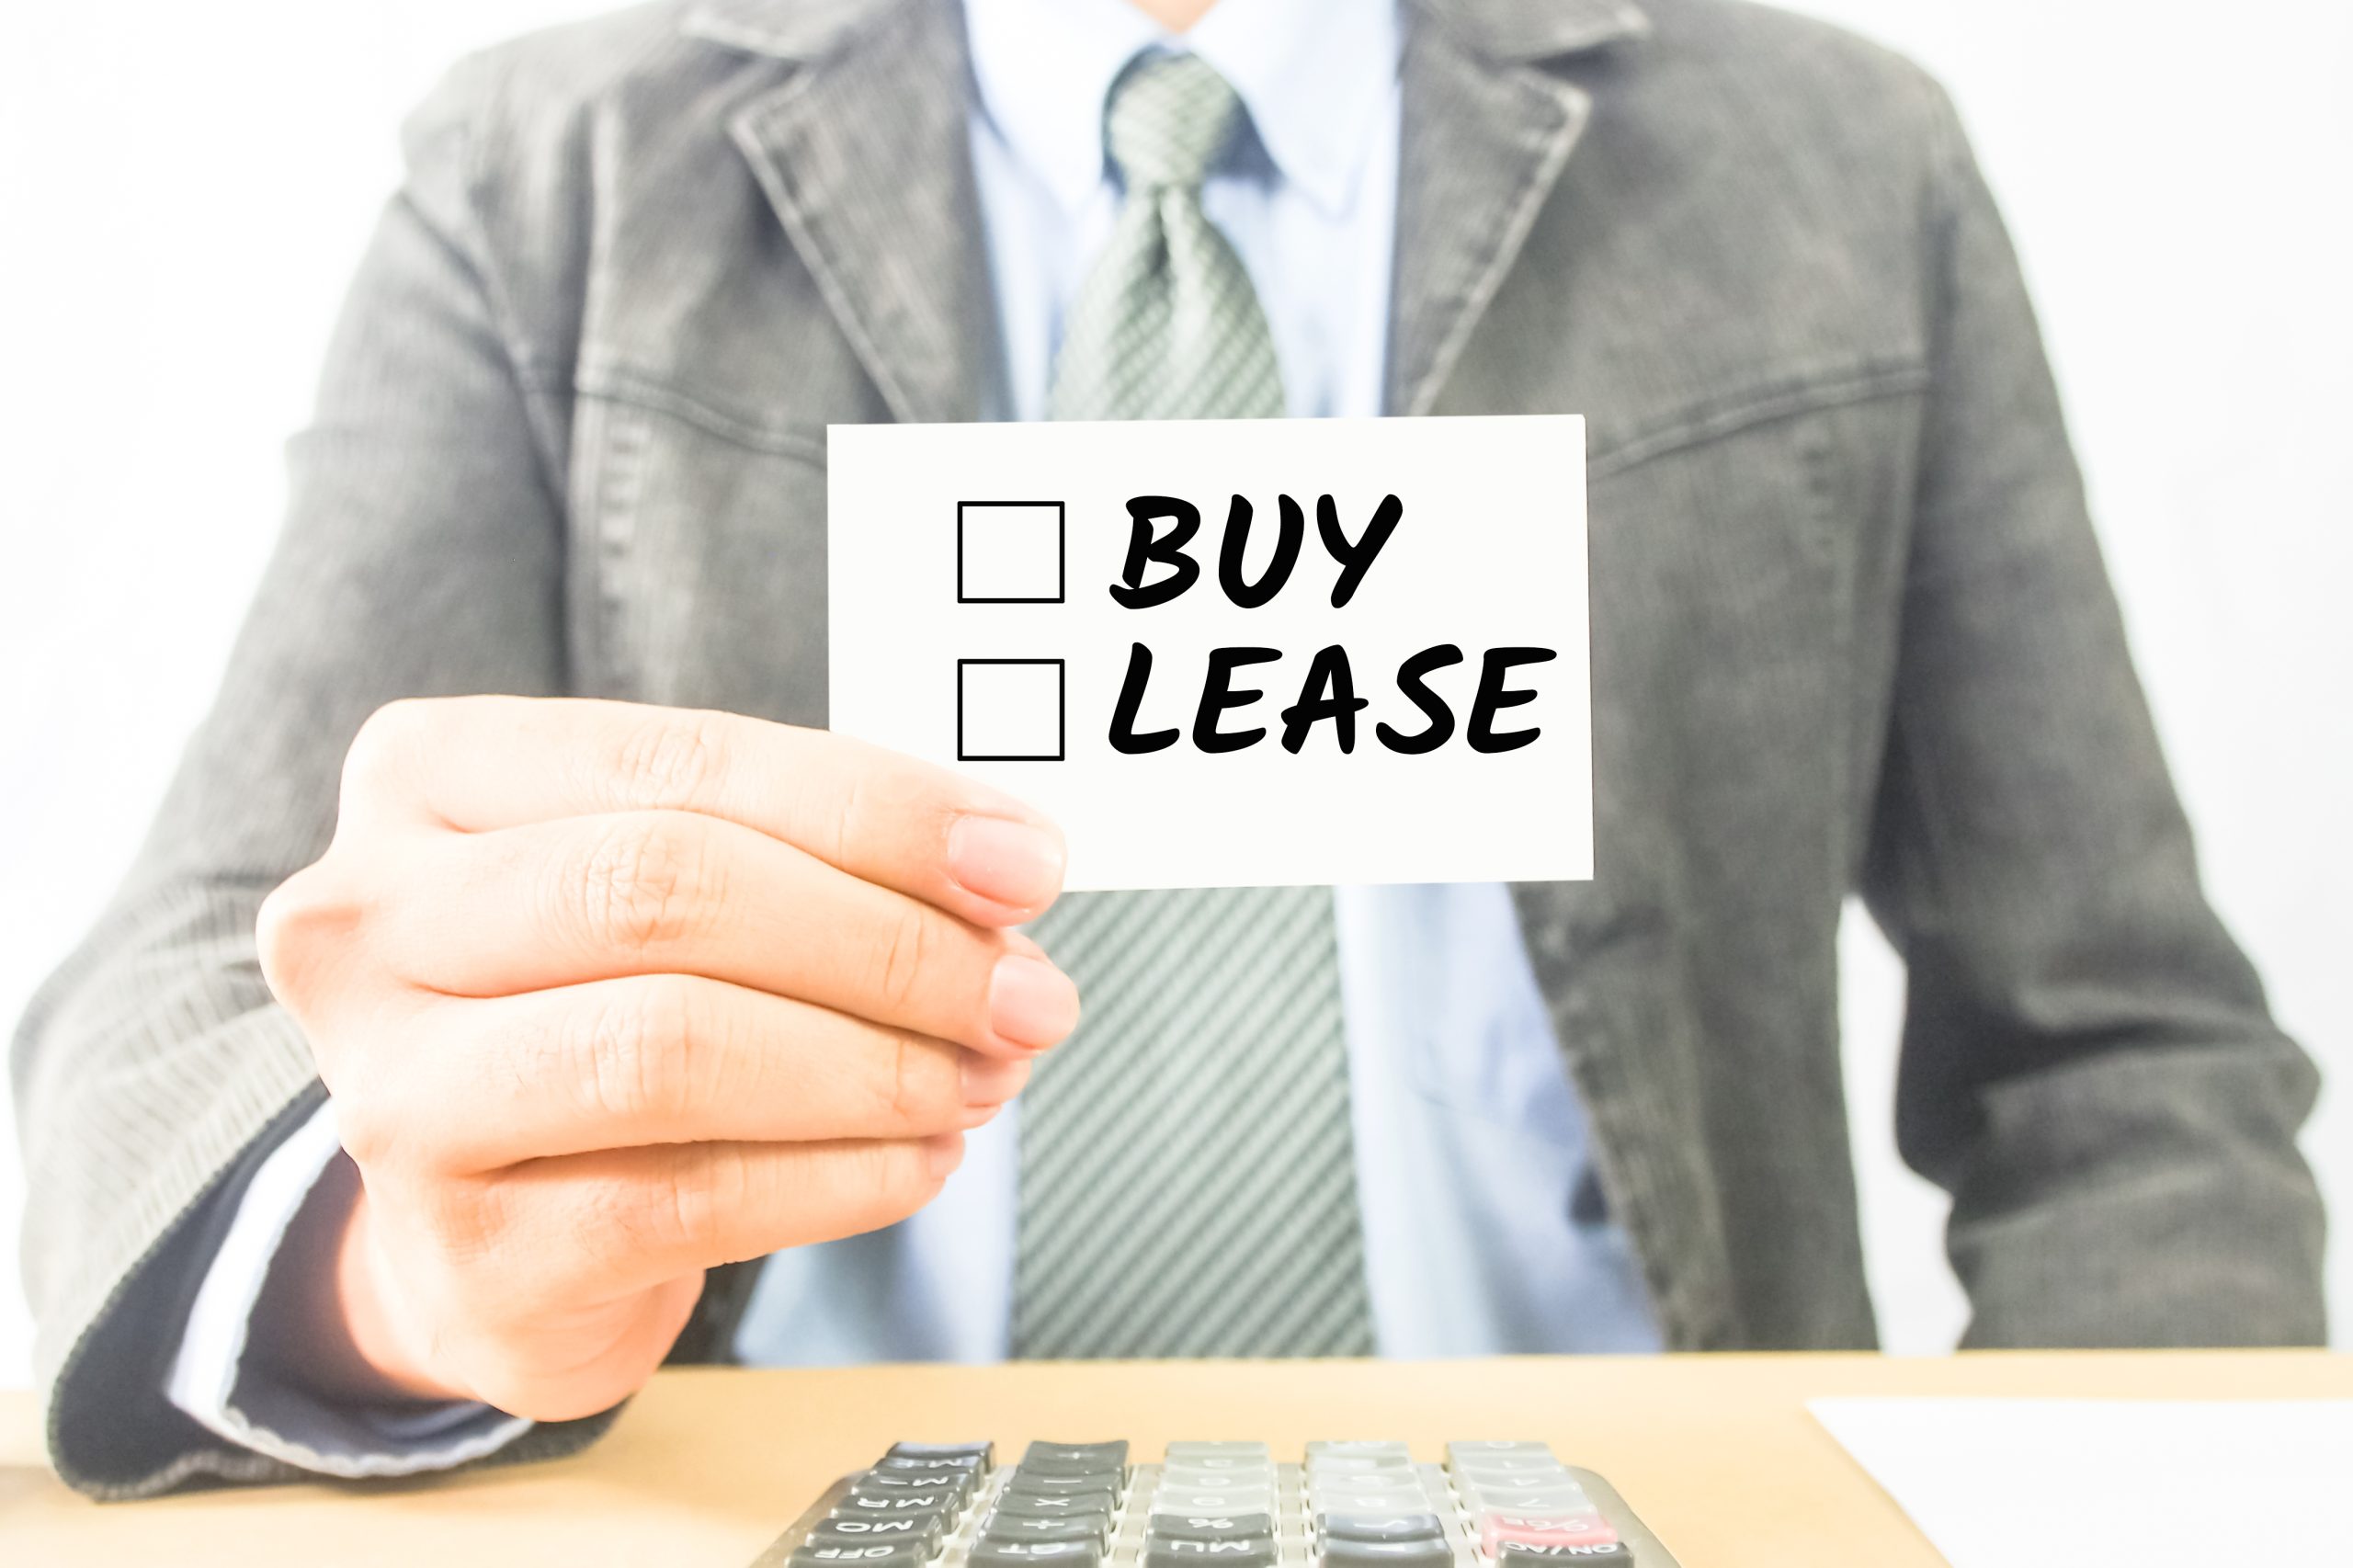 Commercial Real Estate (CRE) - Office Space: Lease or Buy Considerations